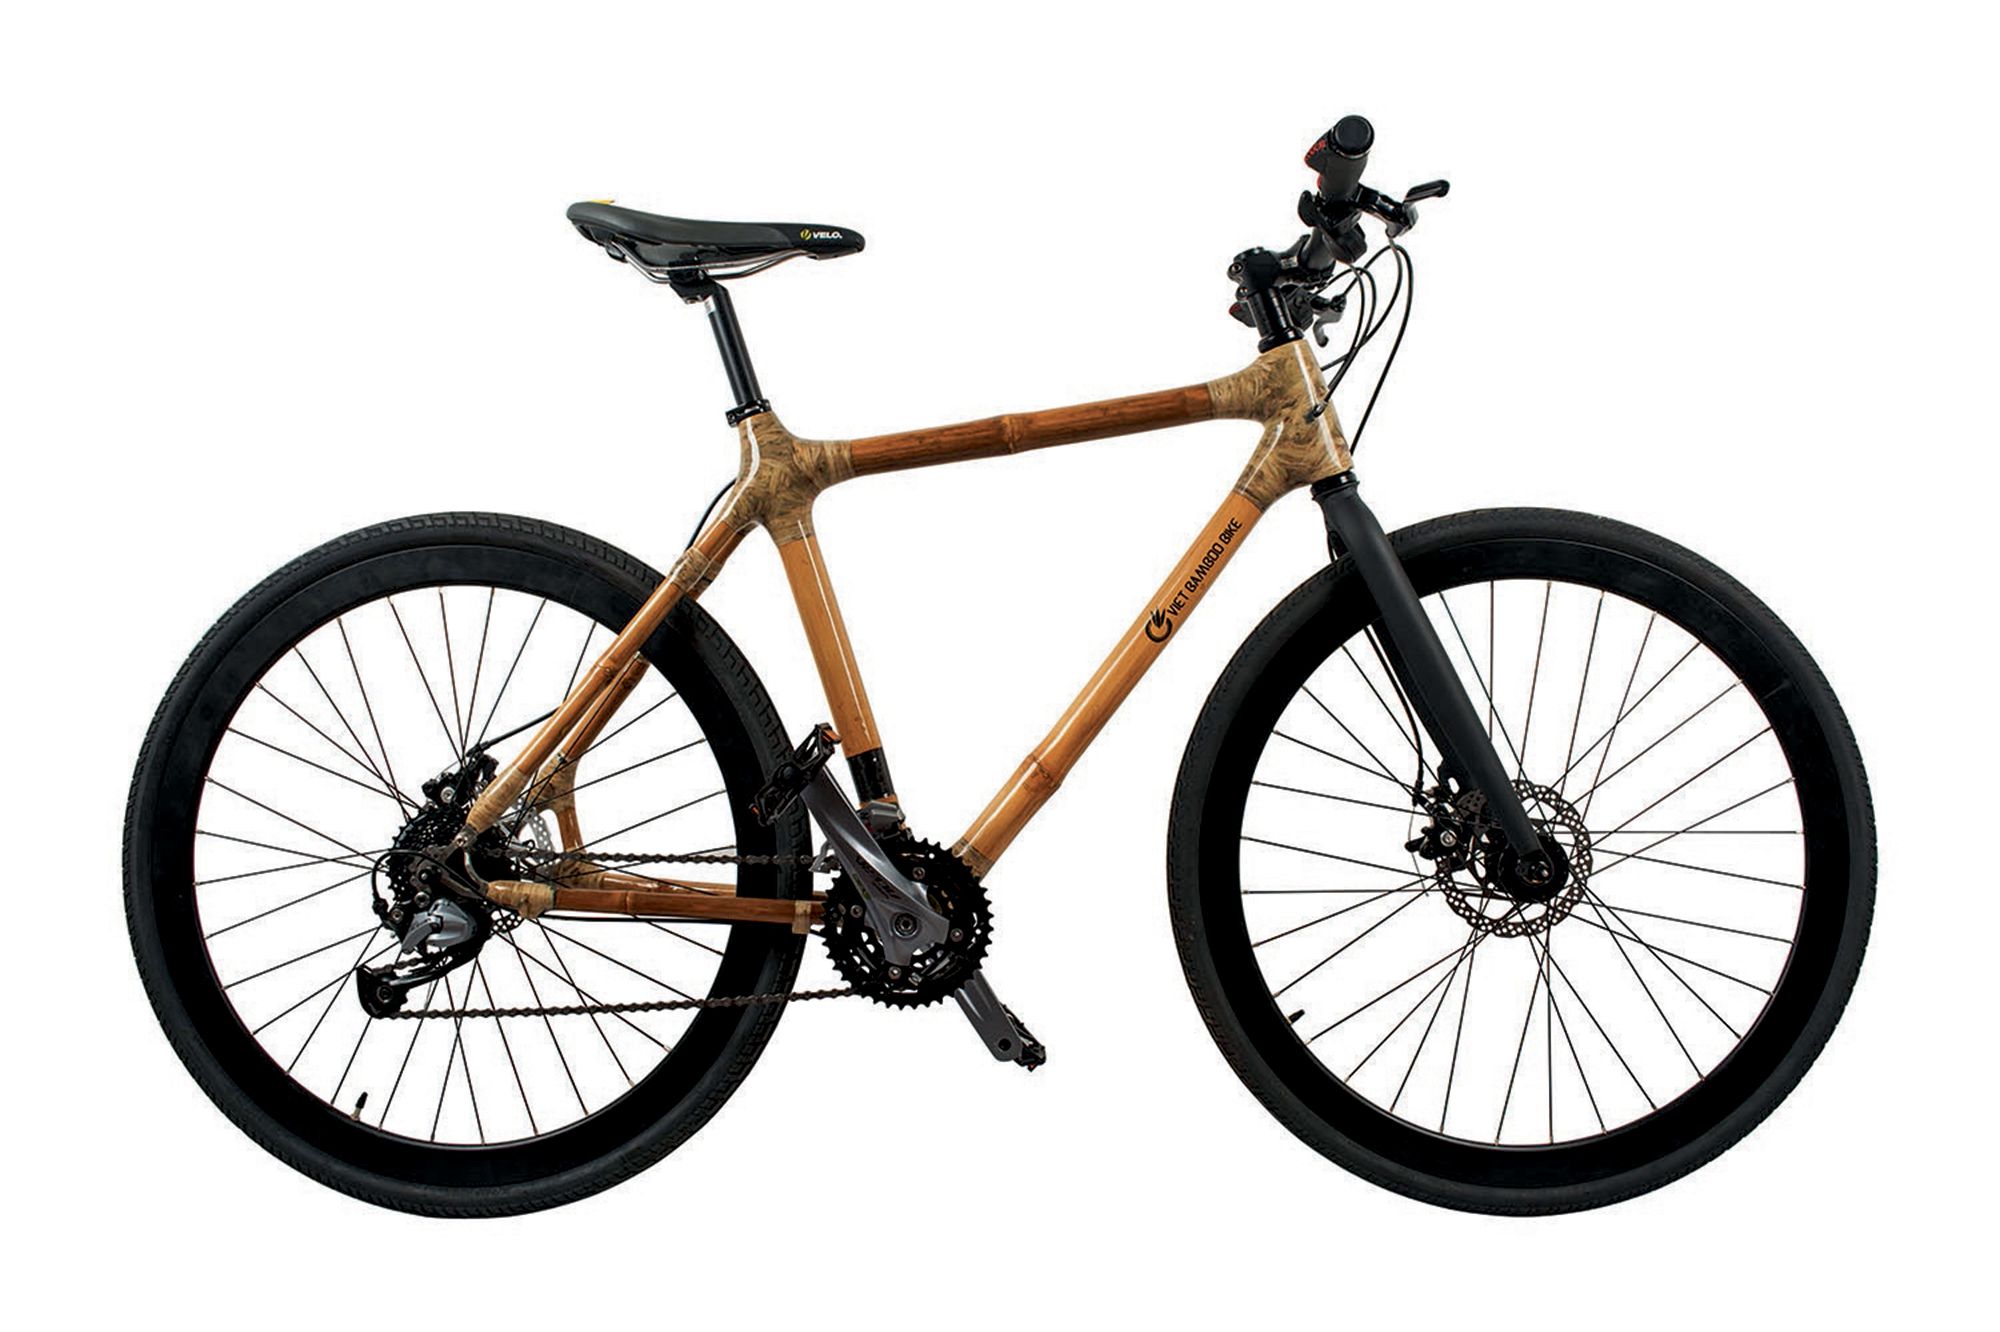 The wooden bike is becoming trendy